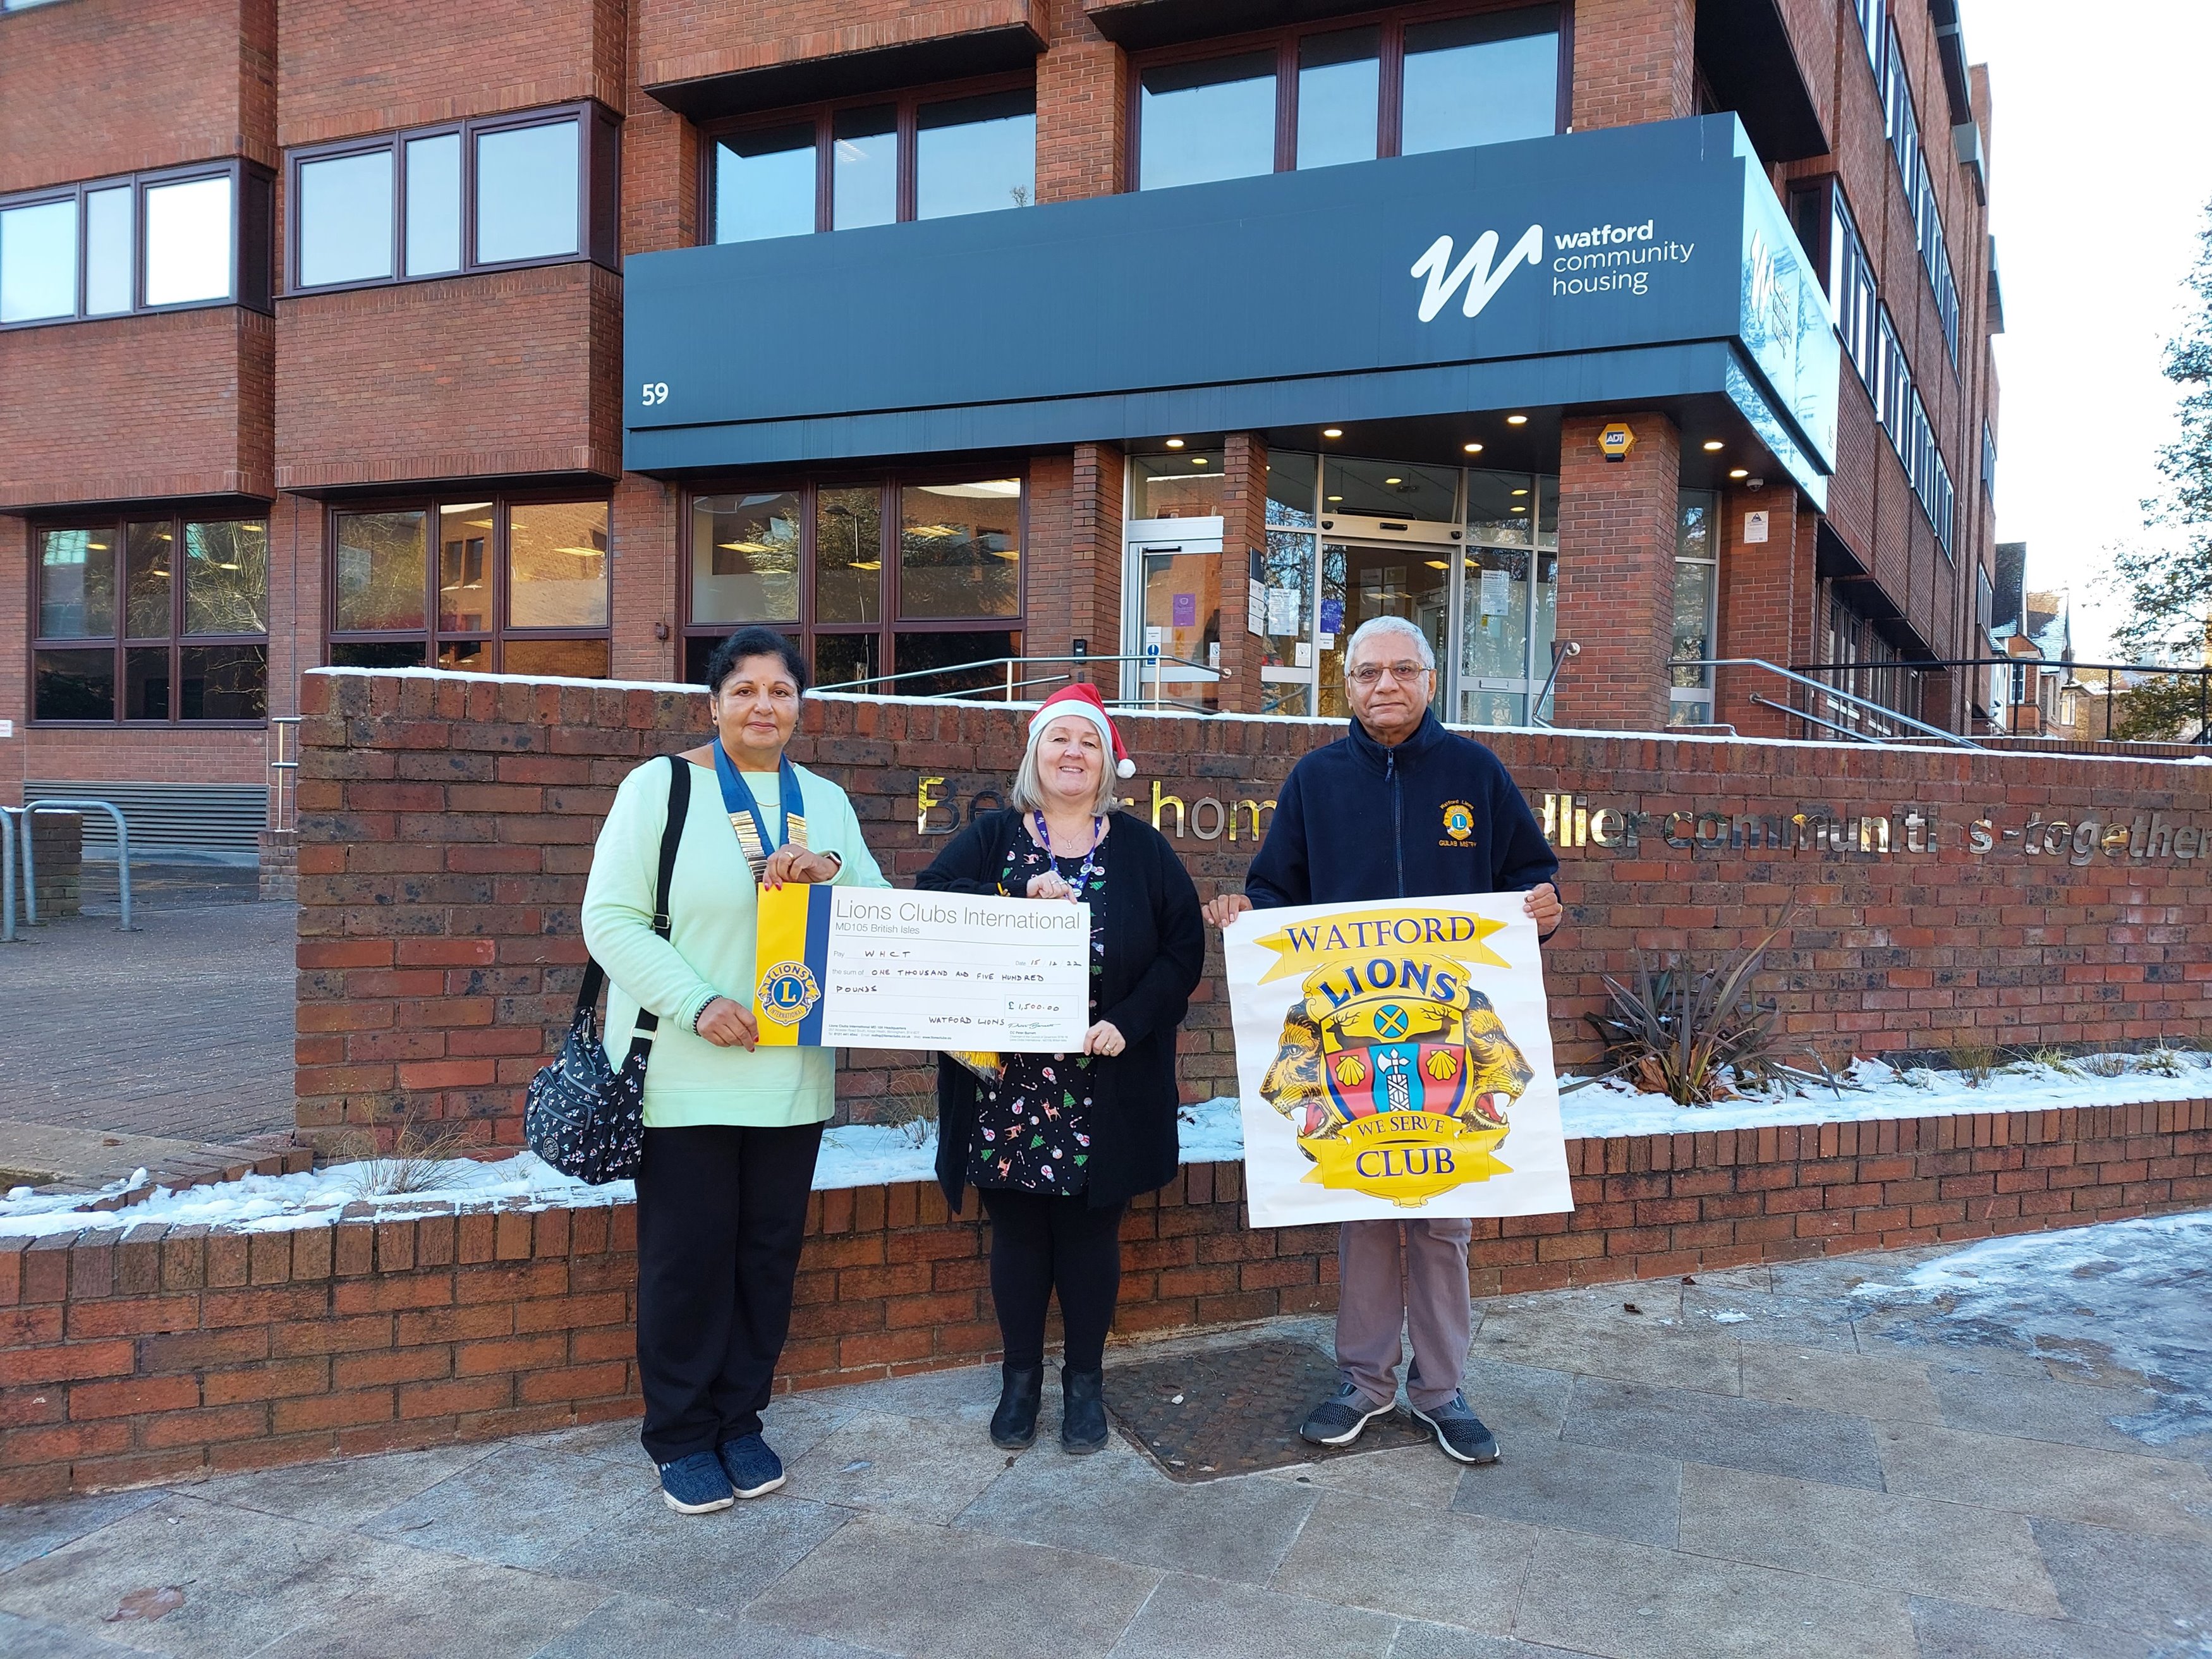 Watford Lions Club help support our tenants this winter